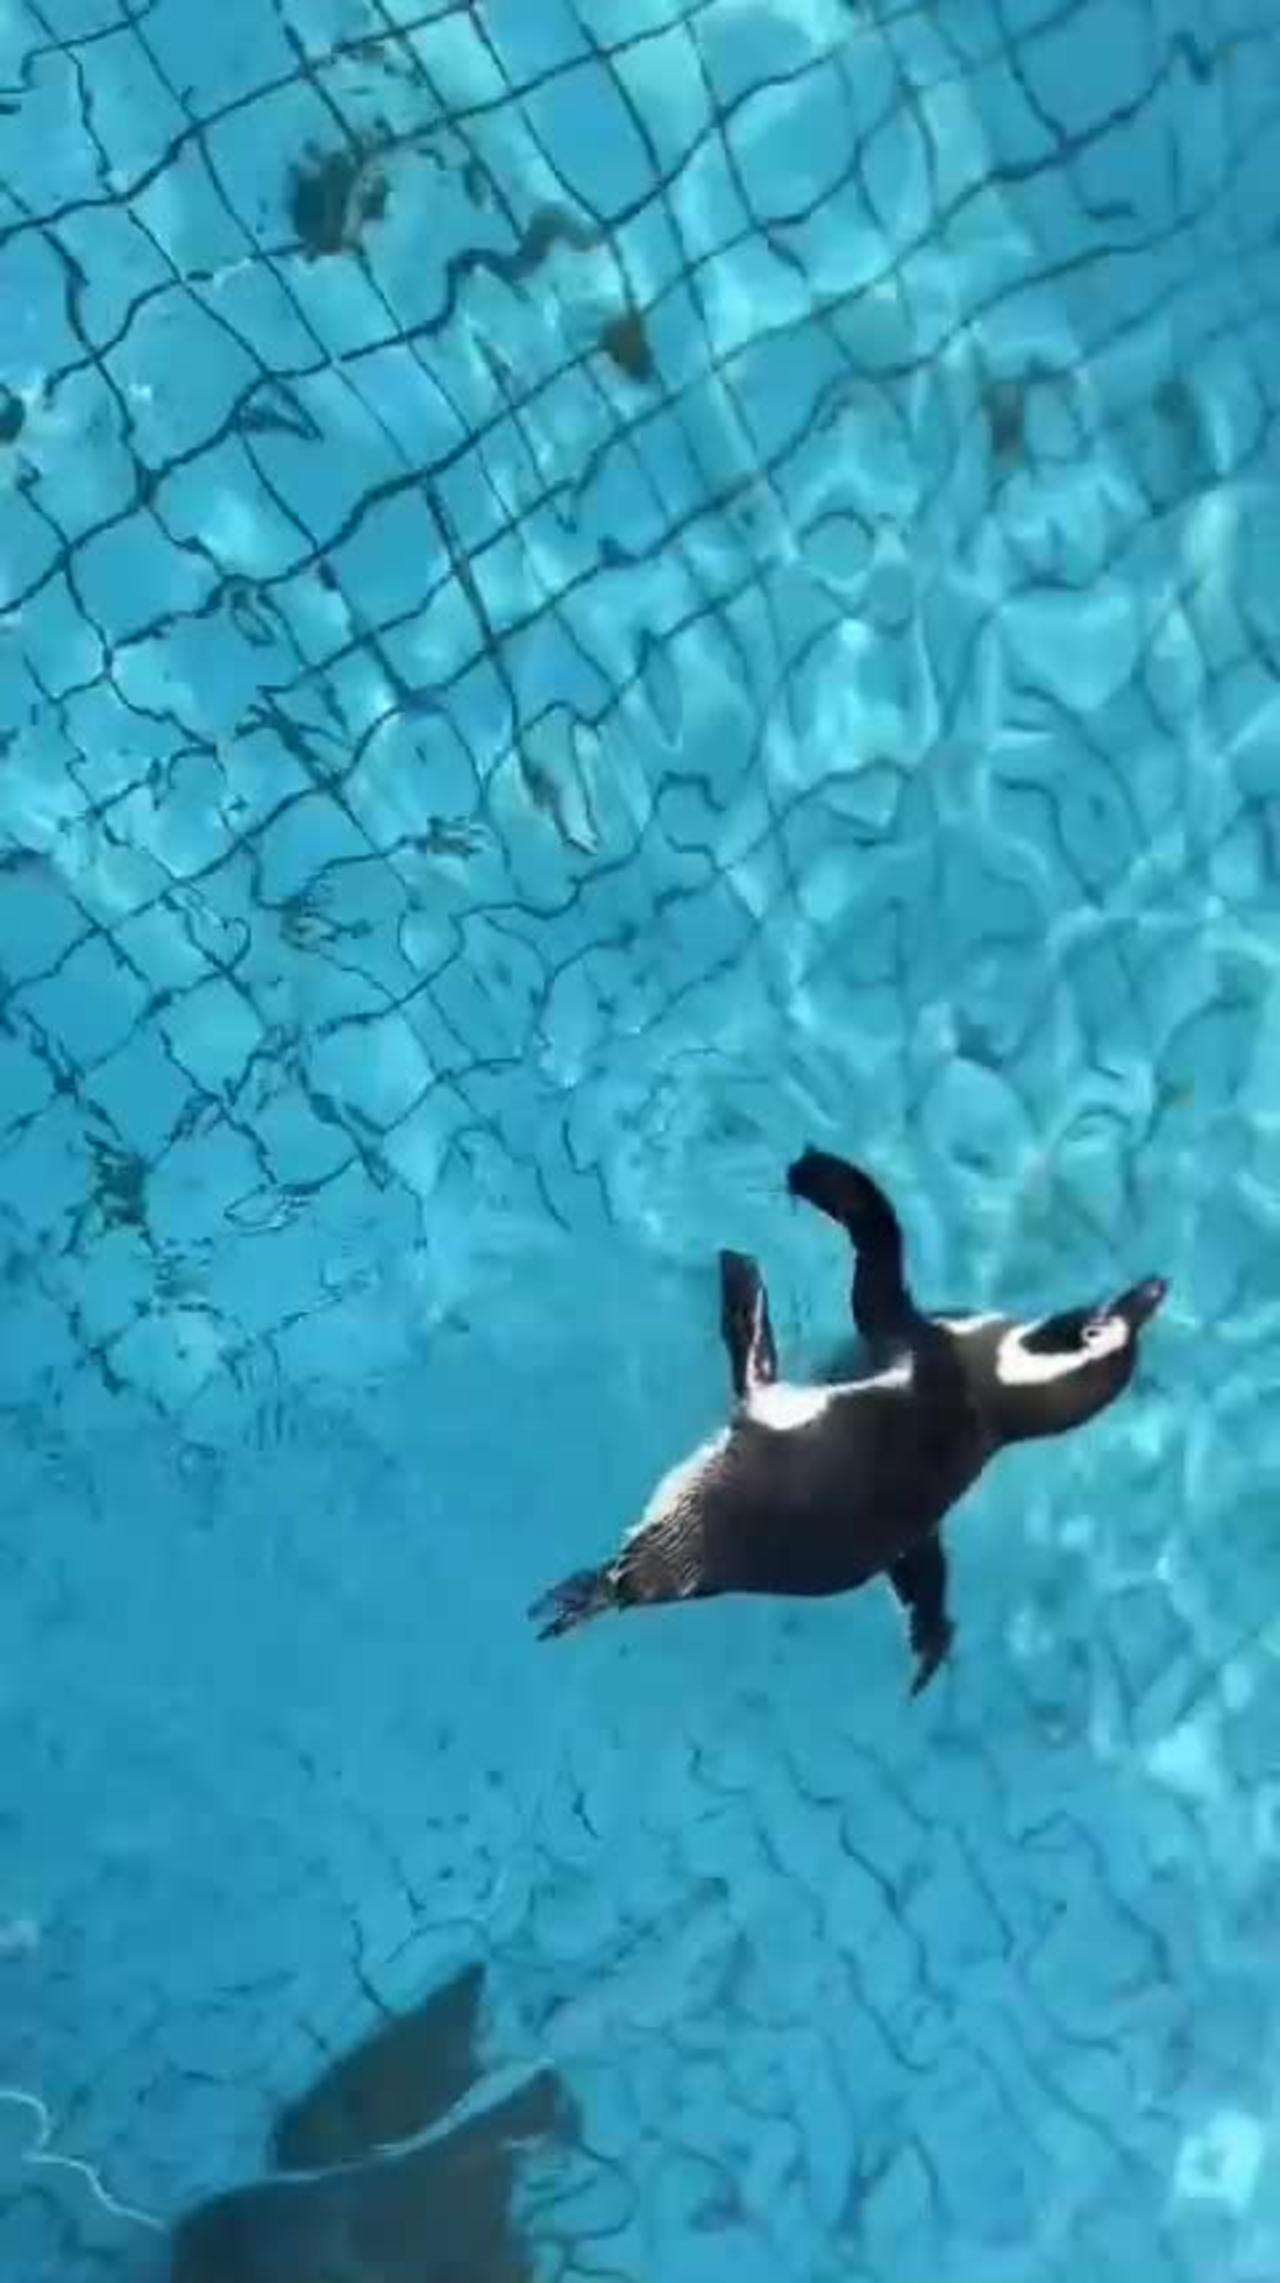 It turns out that penguins swim like this